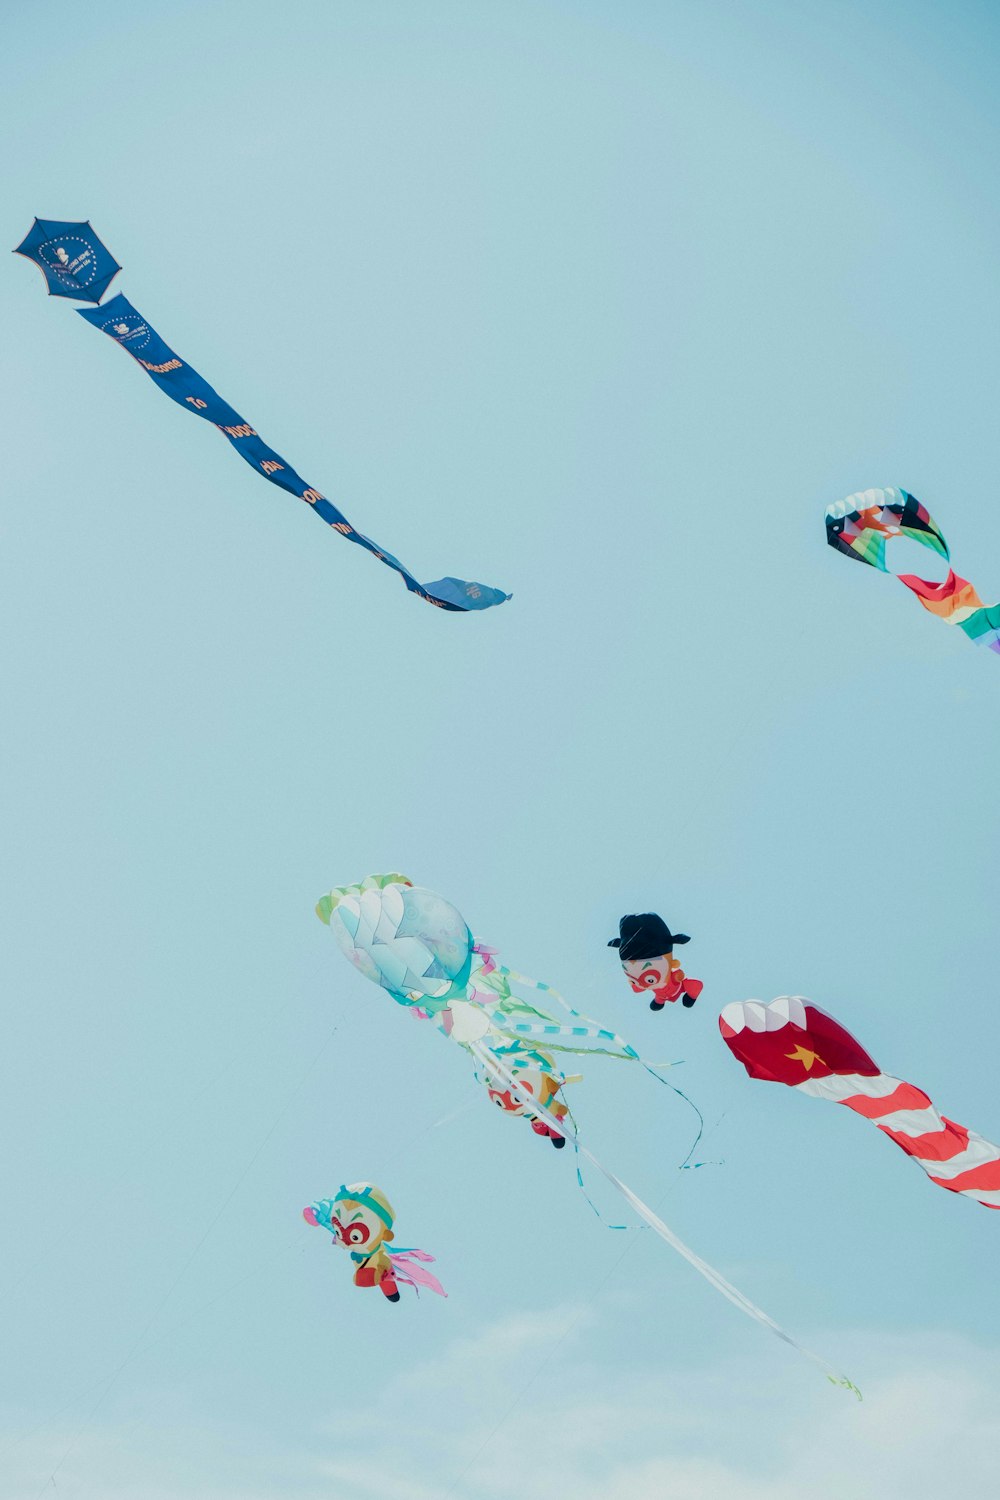 a group of kites flying in the sky